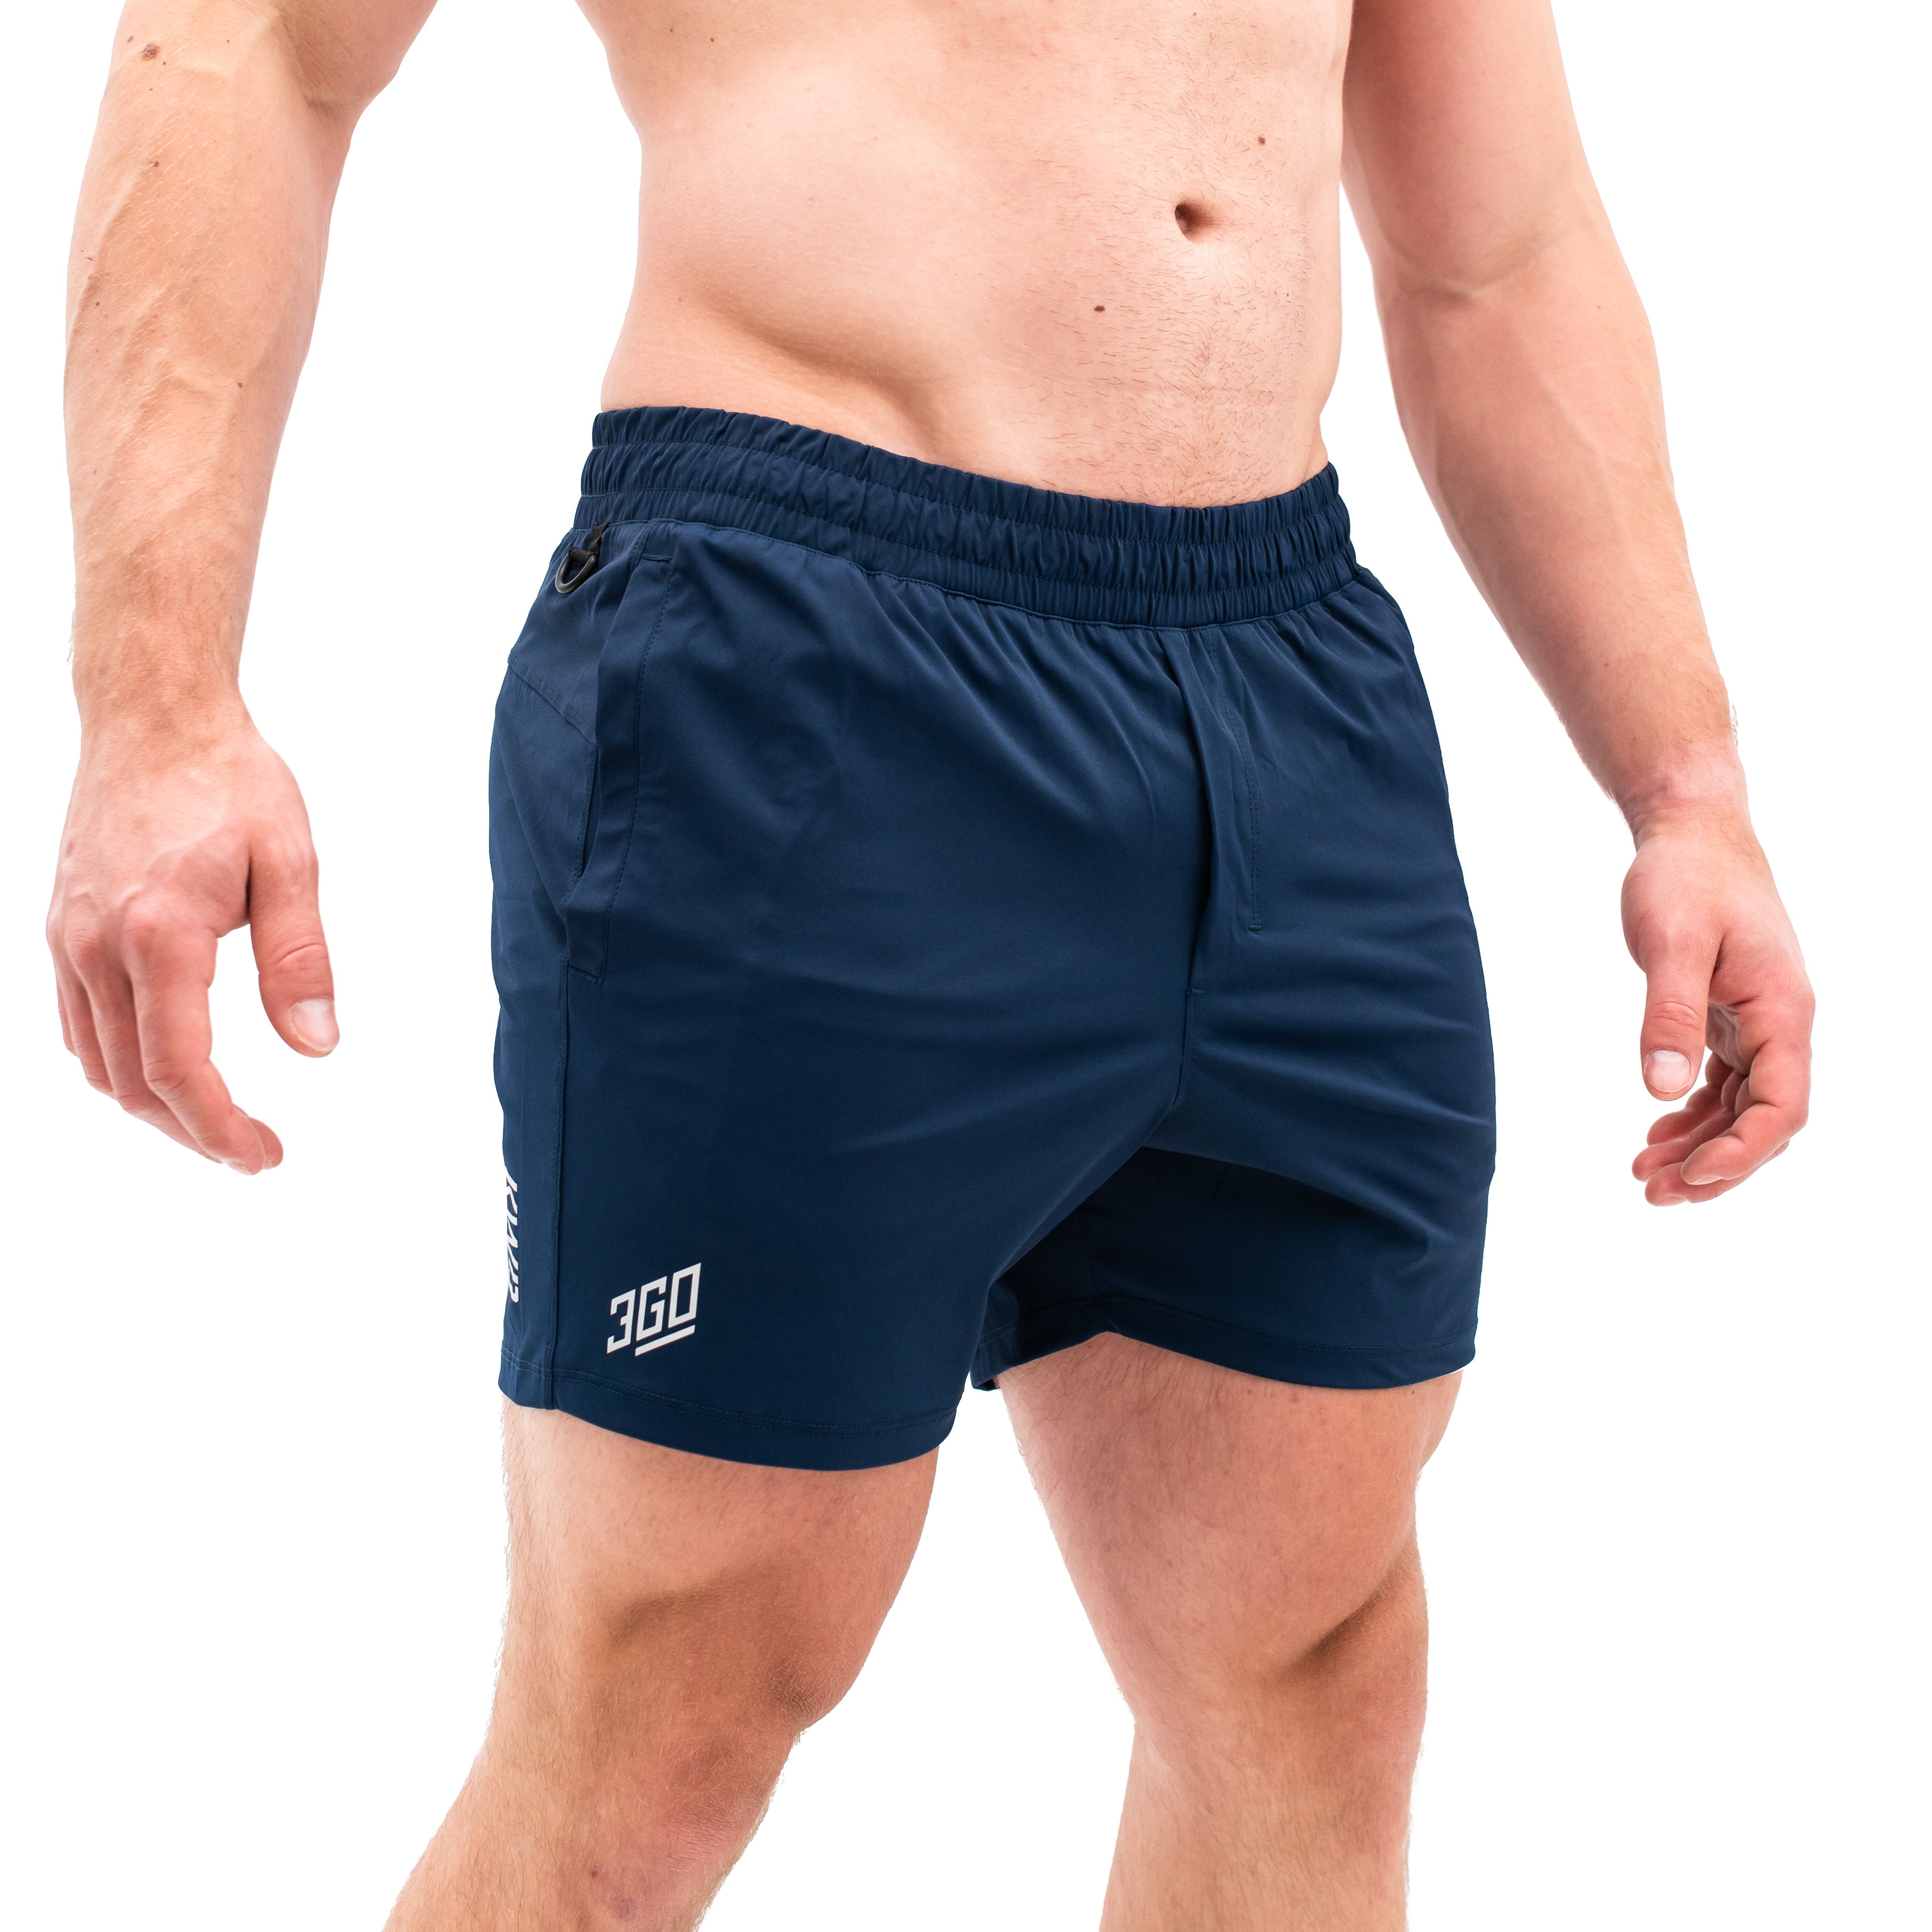 Varsity 360-GO KWD shorts were created to provide the flexibility for all the movements in your training while offering the comfort and fit you have come to love through our KWD shorts. Purchase 360-GO KWD shorts from A7 UK and A7 Europe. 360-GO KWD shorts are the perfect shorts for powerlifting and weightlifting training. Available in UK and Europe including France, Italy, Germany, the Netherlands, Sweden and Poland.